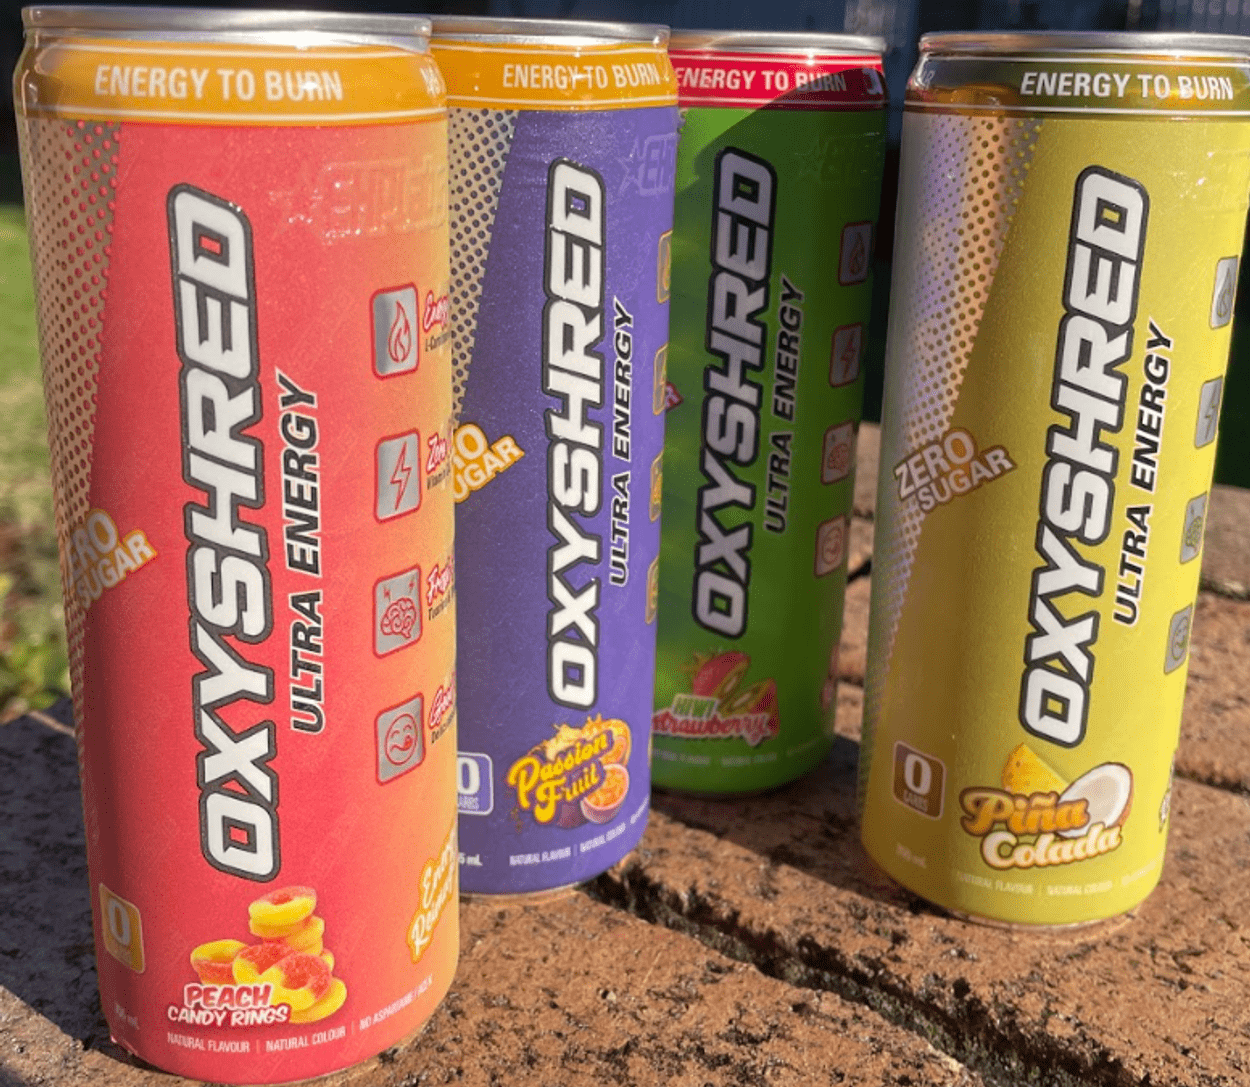 OxyShred Energy Drink Review (Seven Out Of Ten)